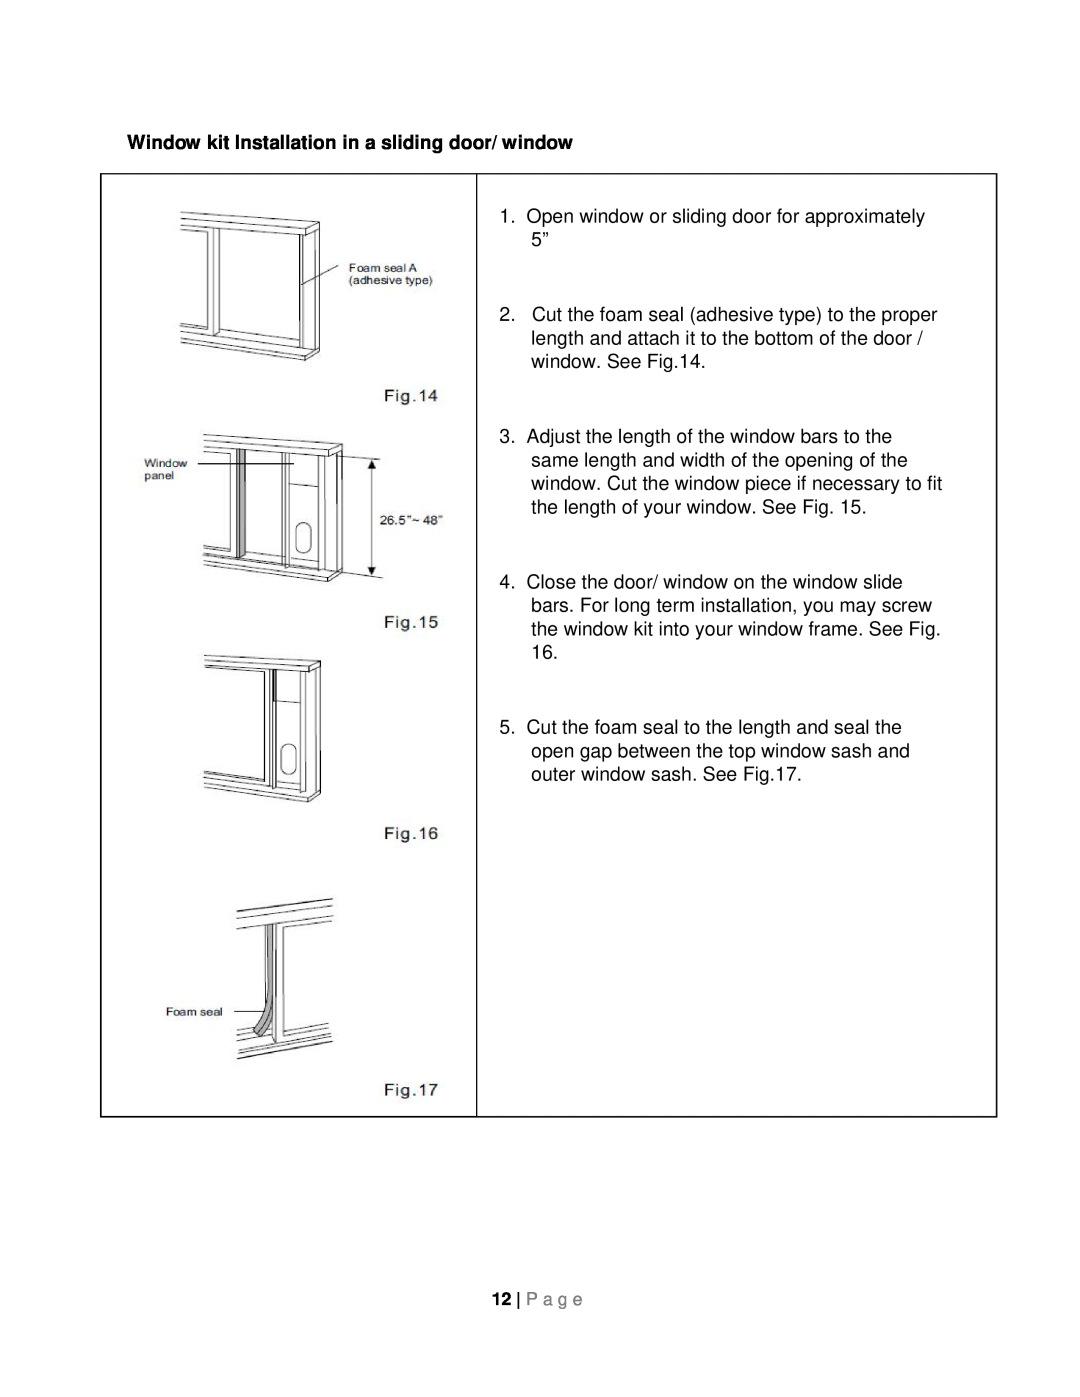 Whynter ARC-08WB instruction manual Window kit Installation in a sliding door/ window, P a g e 